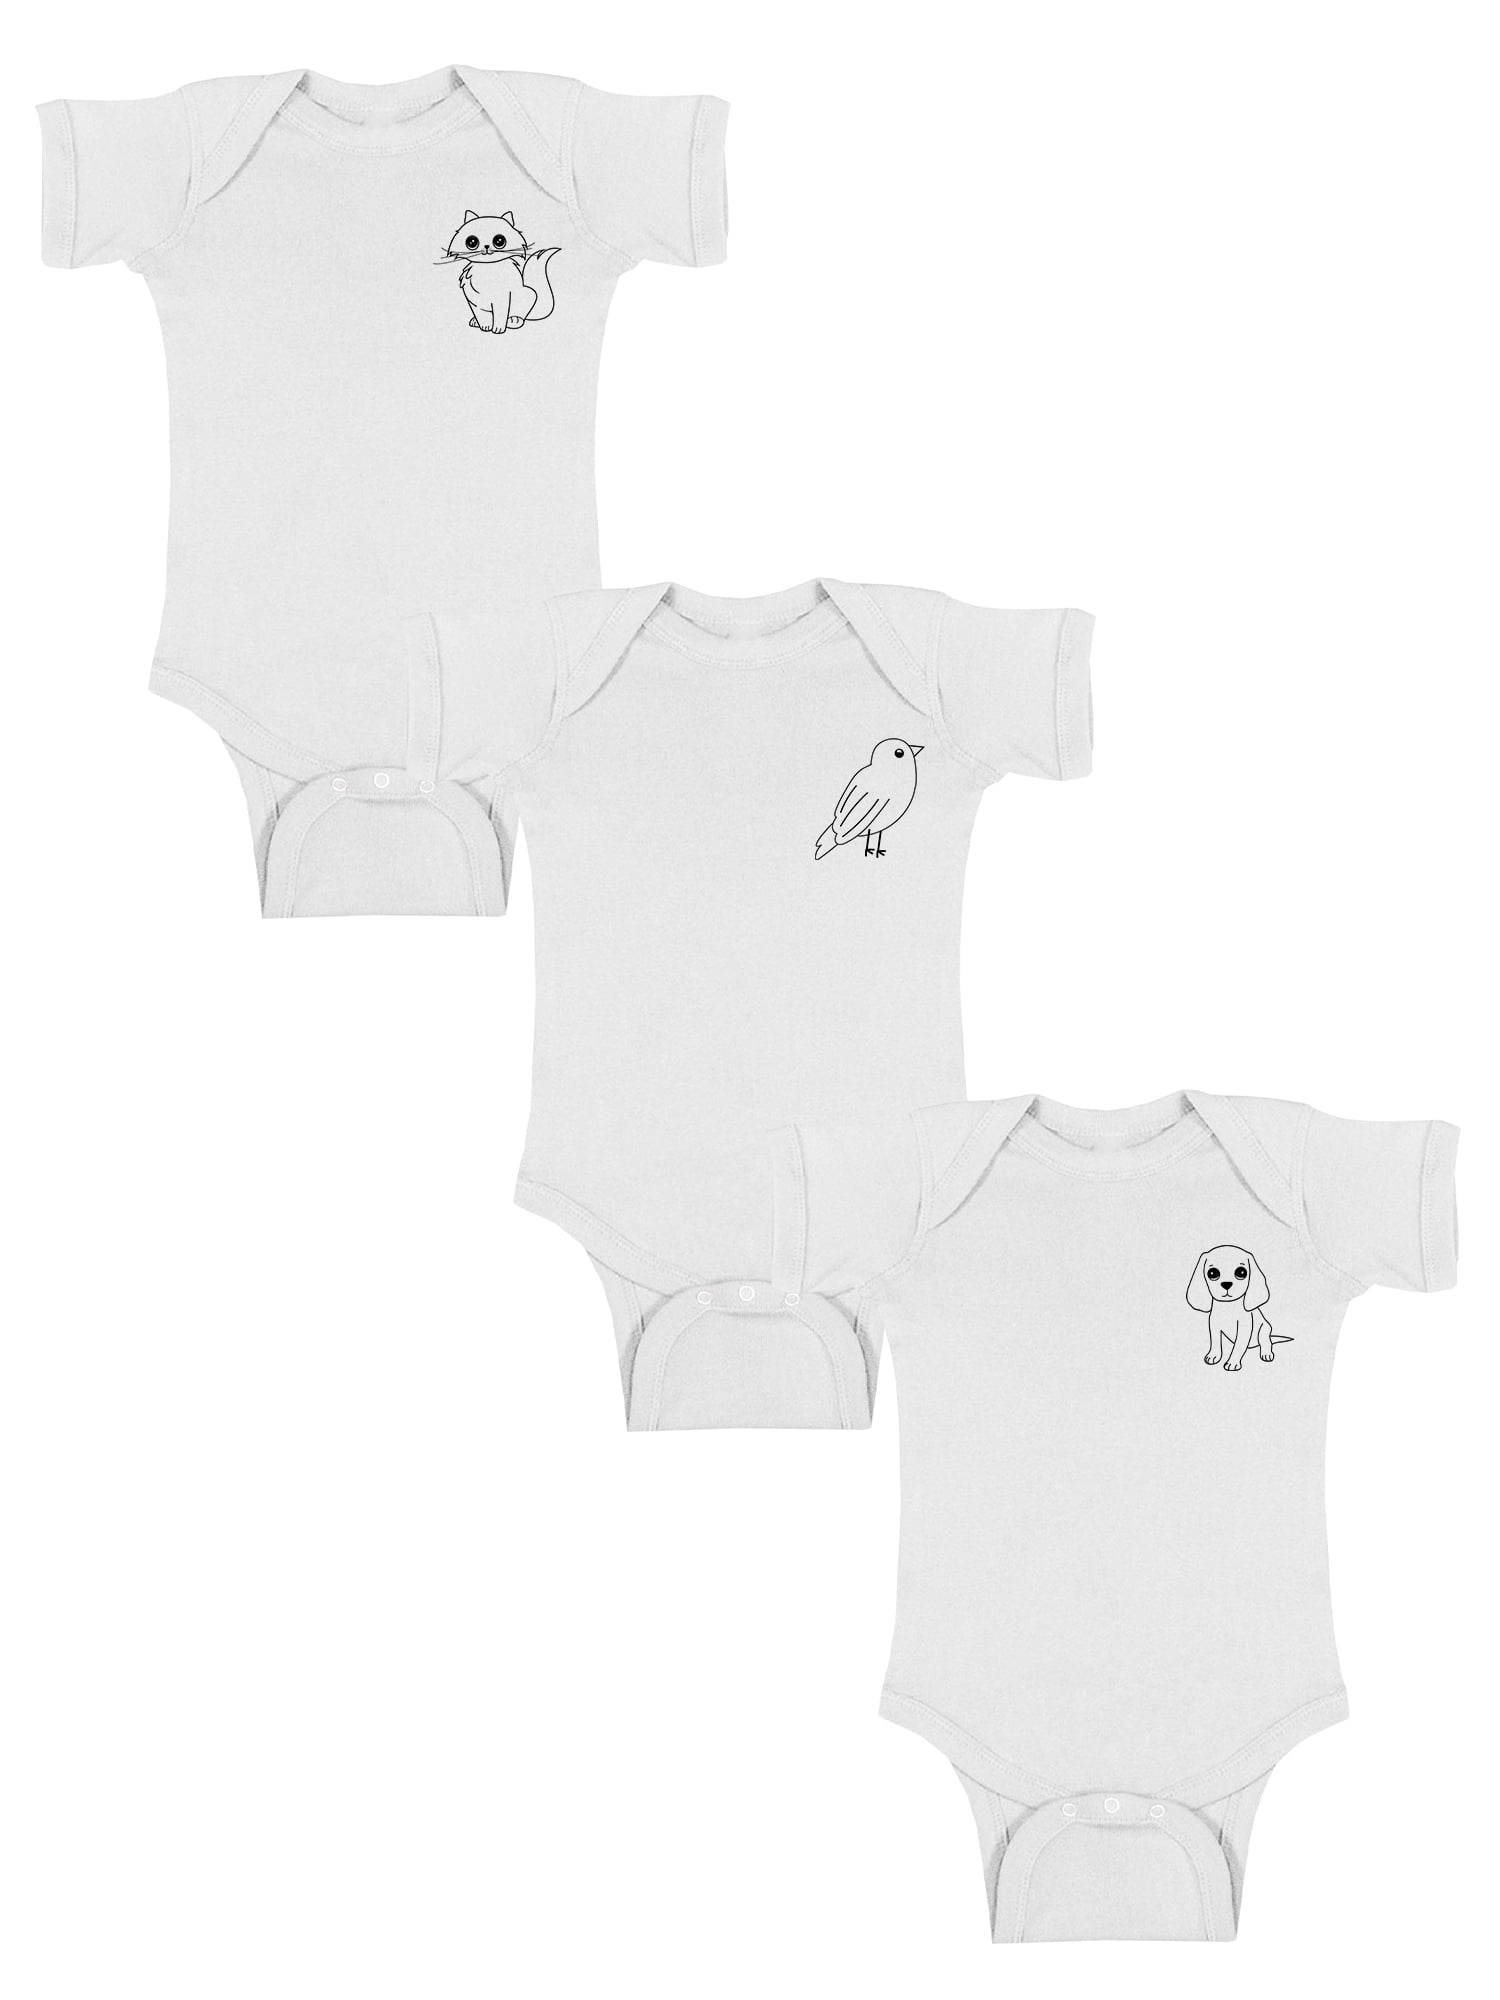 Baby Boys Multi-Pack of 2 Bodysuits Vests Long Sleeve Cotton 0-12 Months Bebetto 